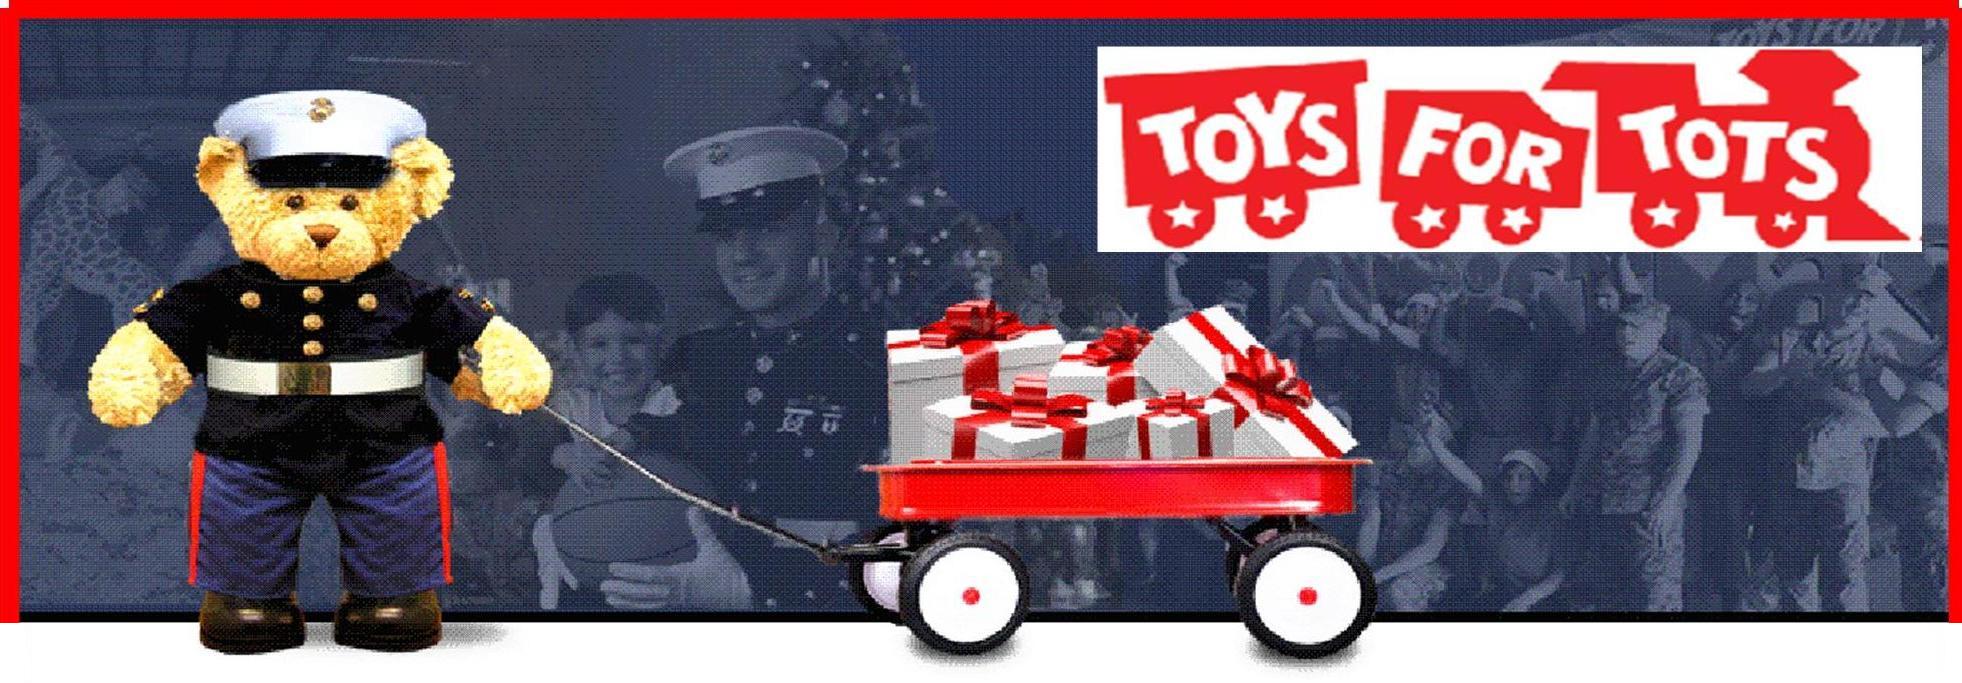 Toys For Tots (Opens in a new window)